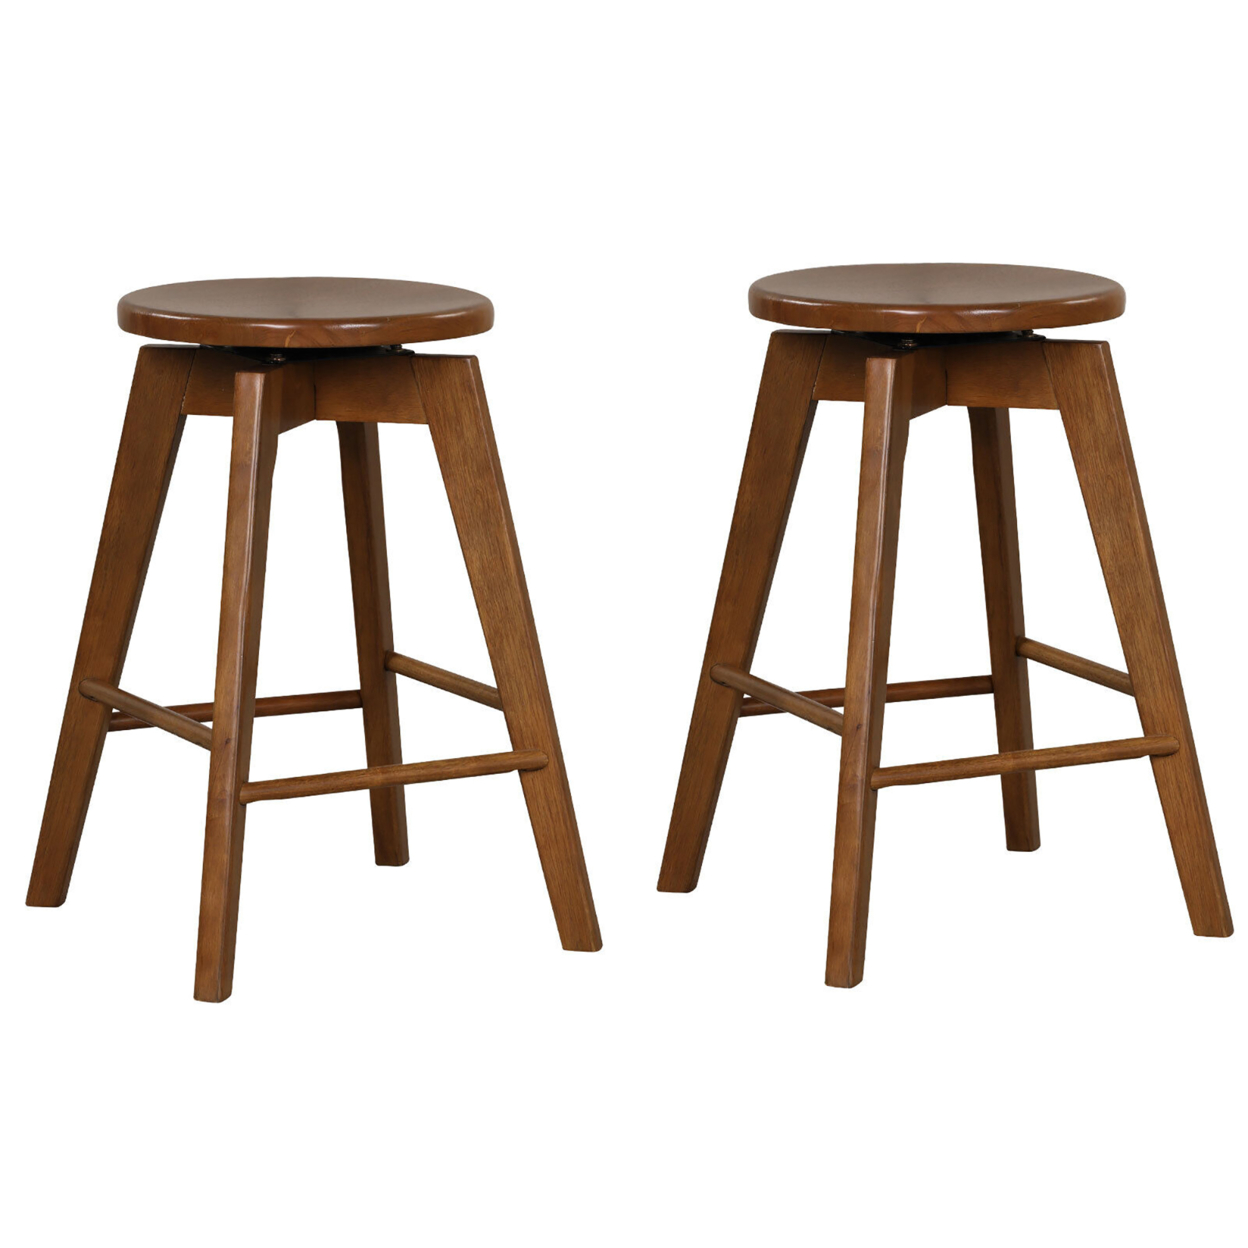 Set Of 2 Swivel Round Bar Stools Counter Height Dining Chairs W/ Rubber Wood Legs